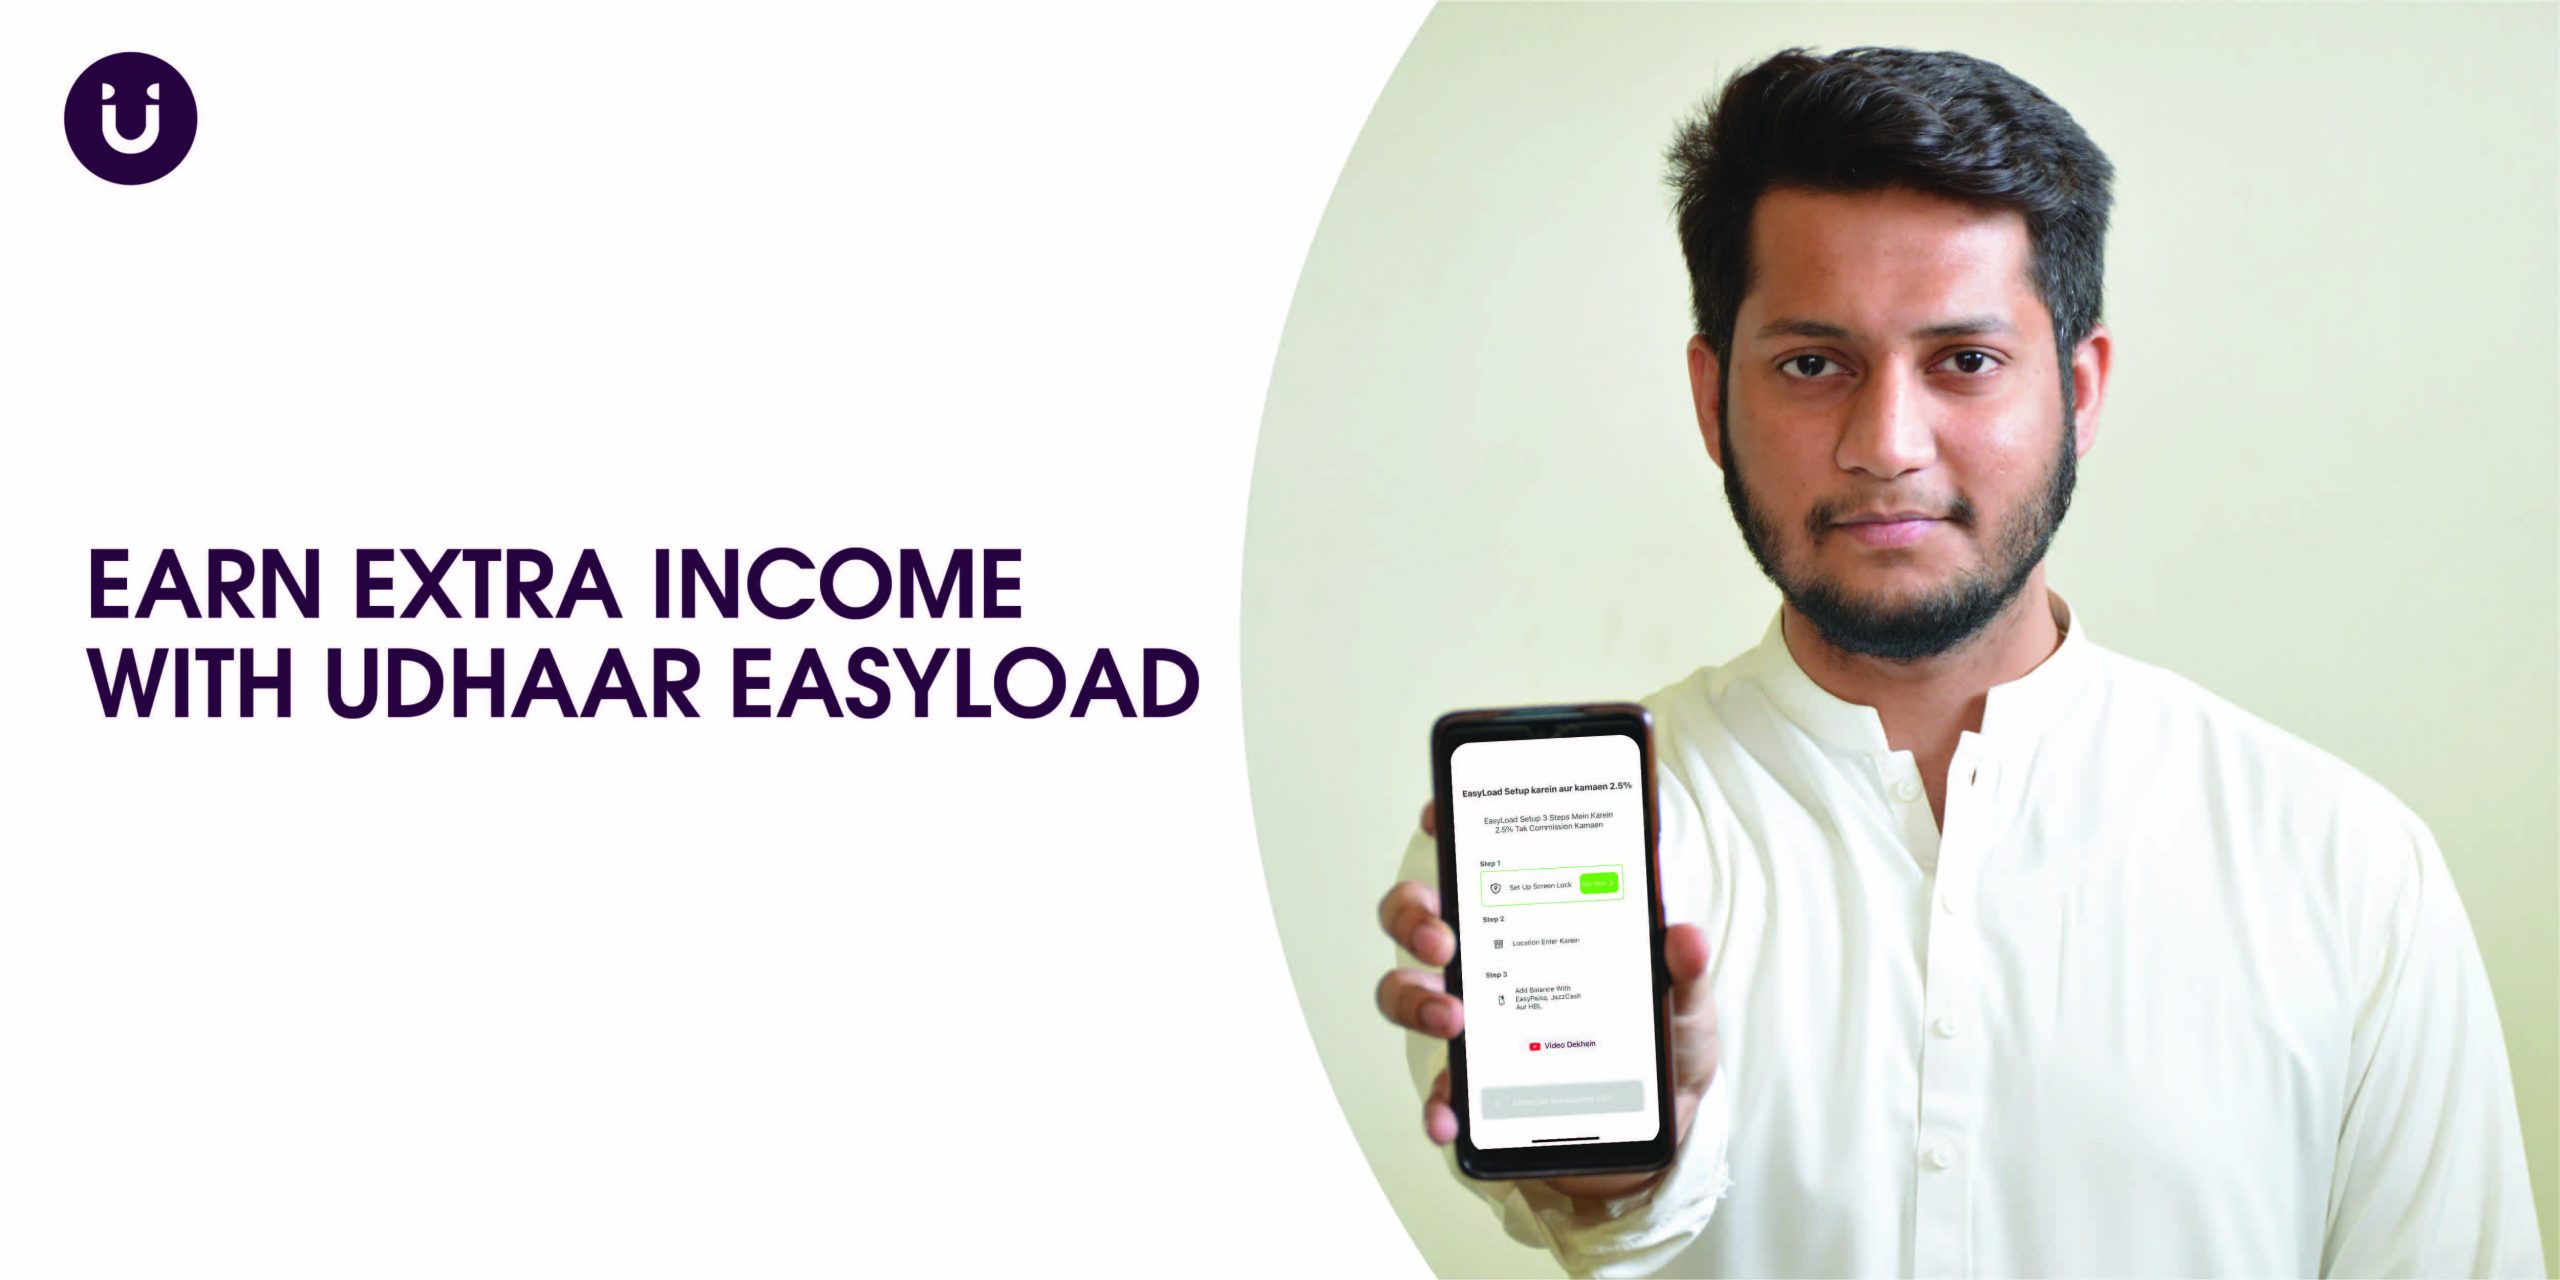 Earn Extra Income with Udhaar Easyload